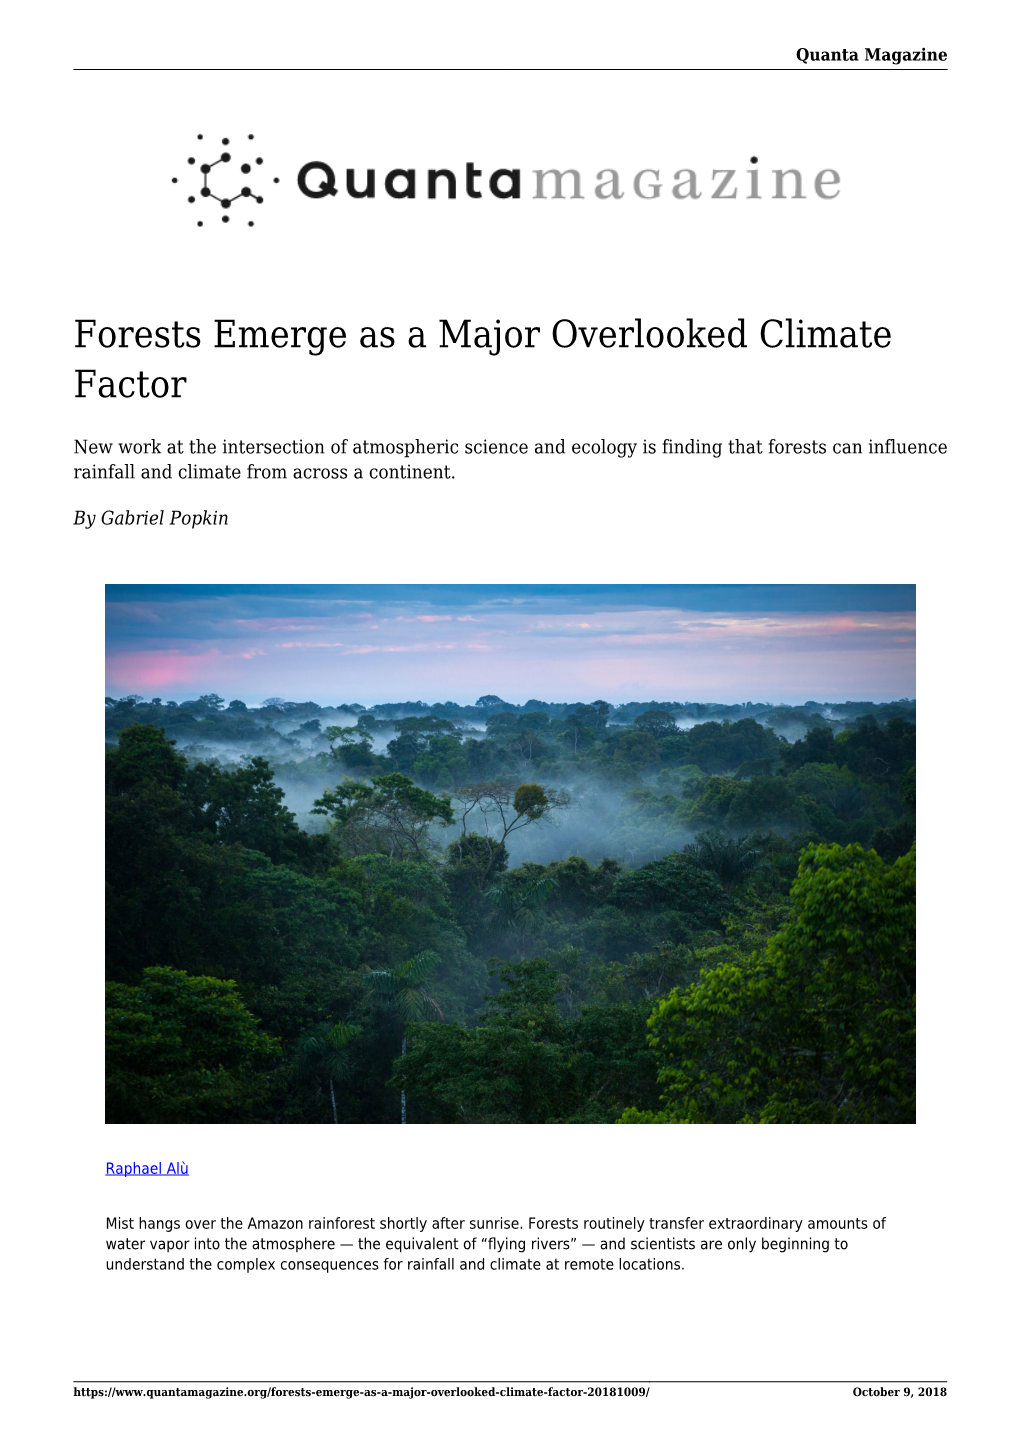 Forests Emerge As a Major Overlooked Climate Factor